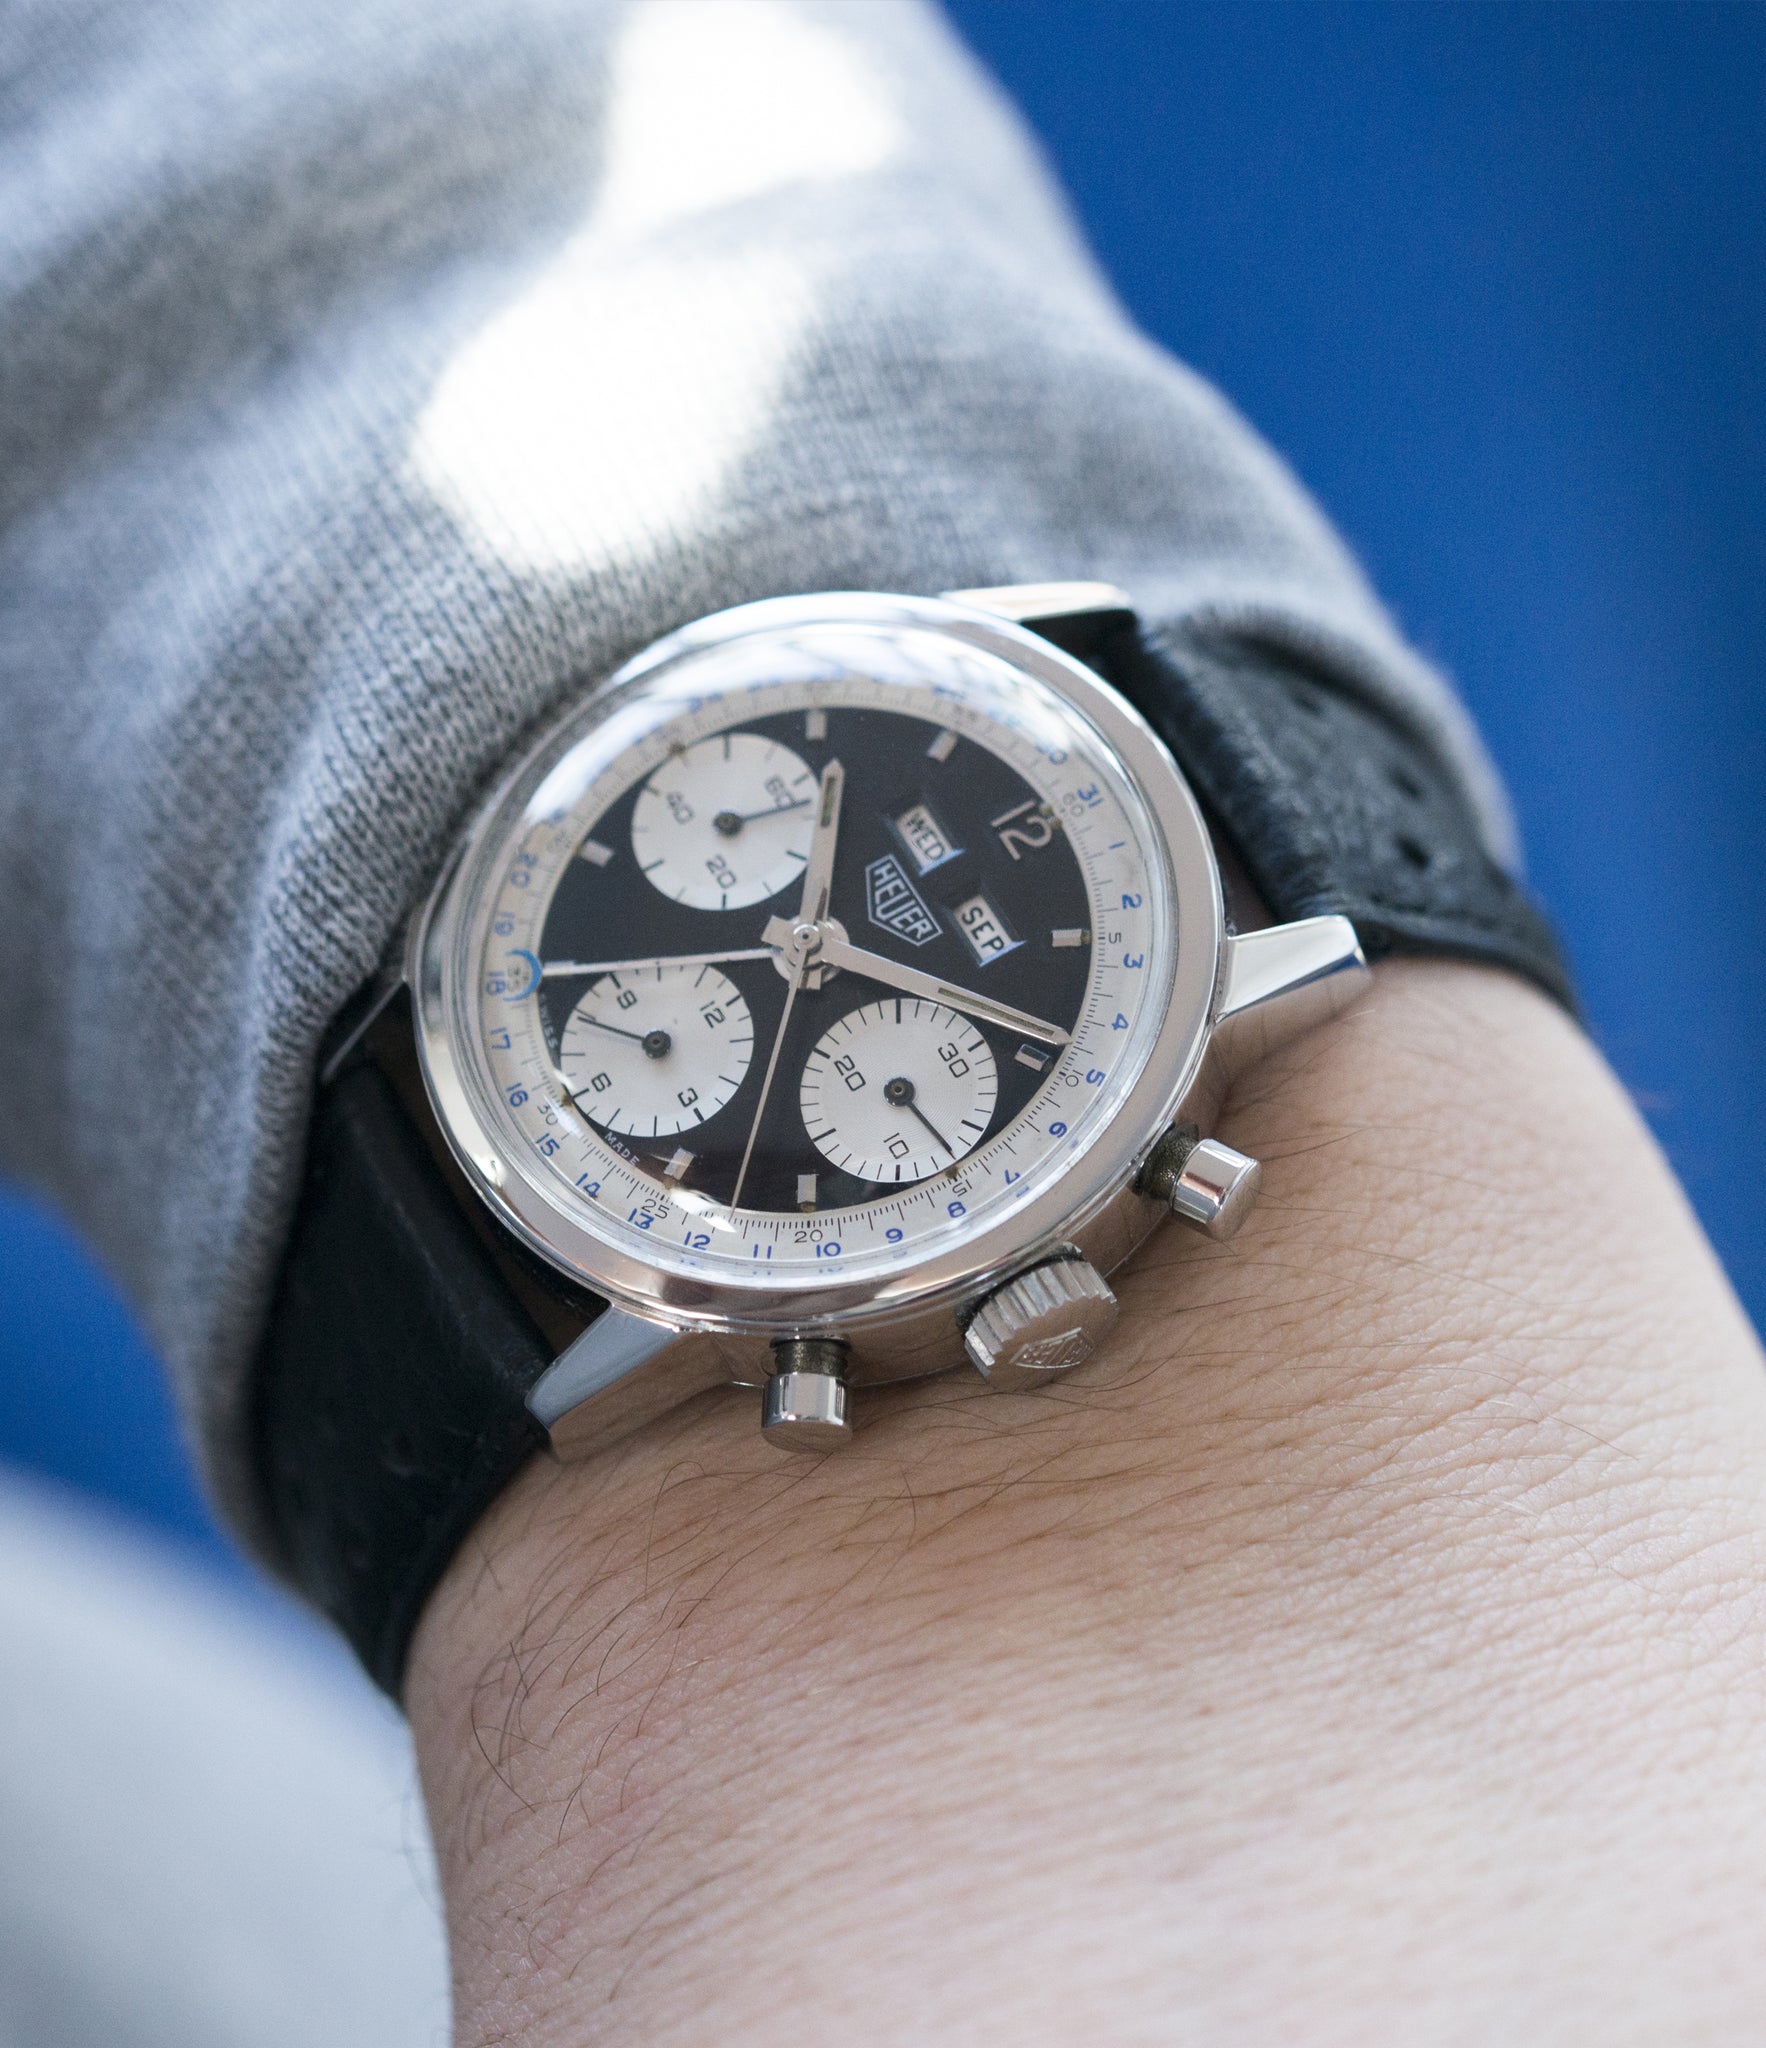 on the wrist vintage Heuer Carrera 2546NS Dato 12 panda dial triple calendar chronograph most complicated Heuer watch for sale online at A Collected Man London UK specialist of rare watches